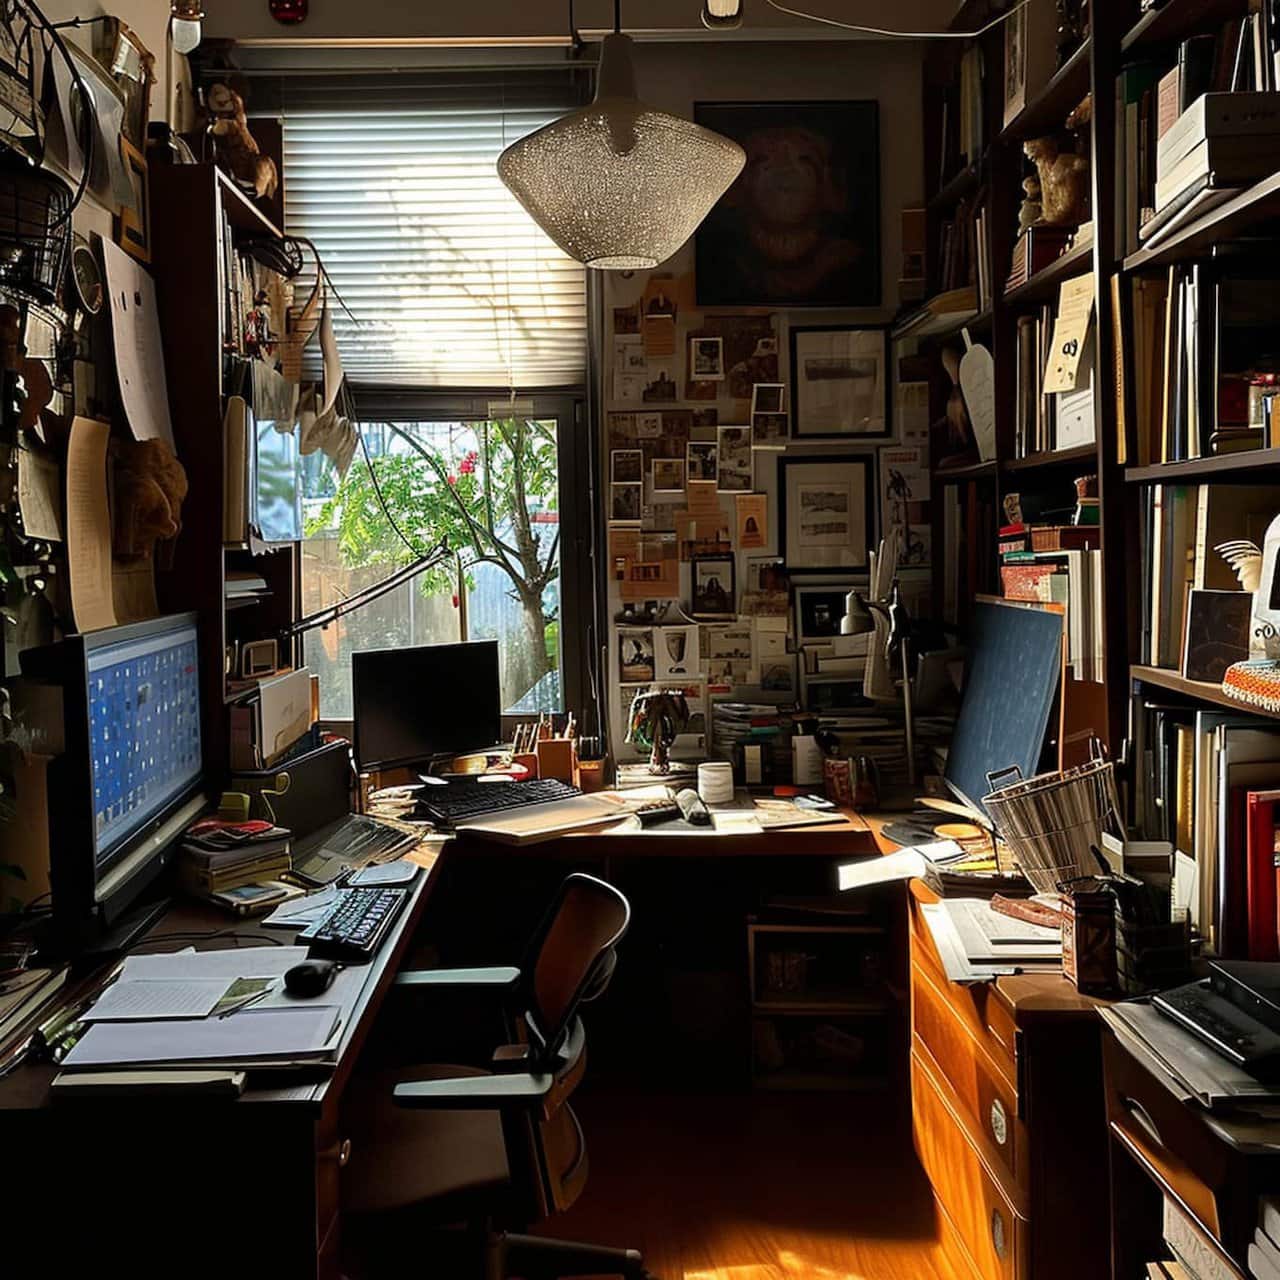 Cluttered and disorganized home office space in need of a spring cleaning overhaul